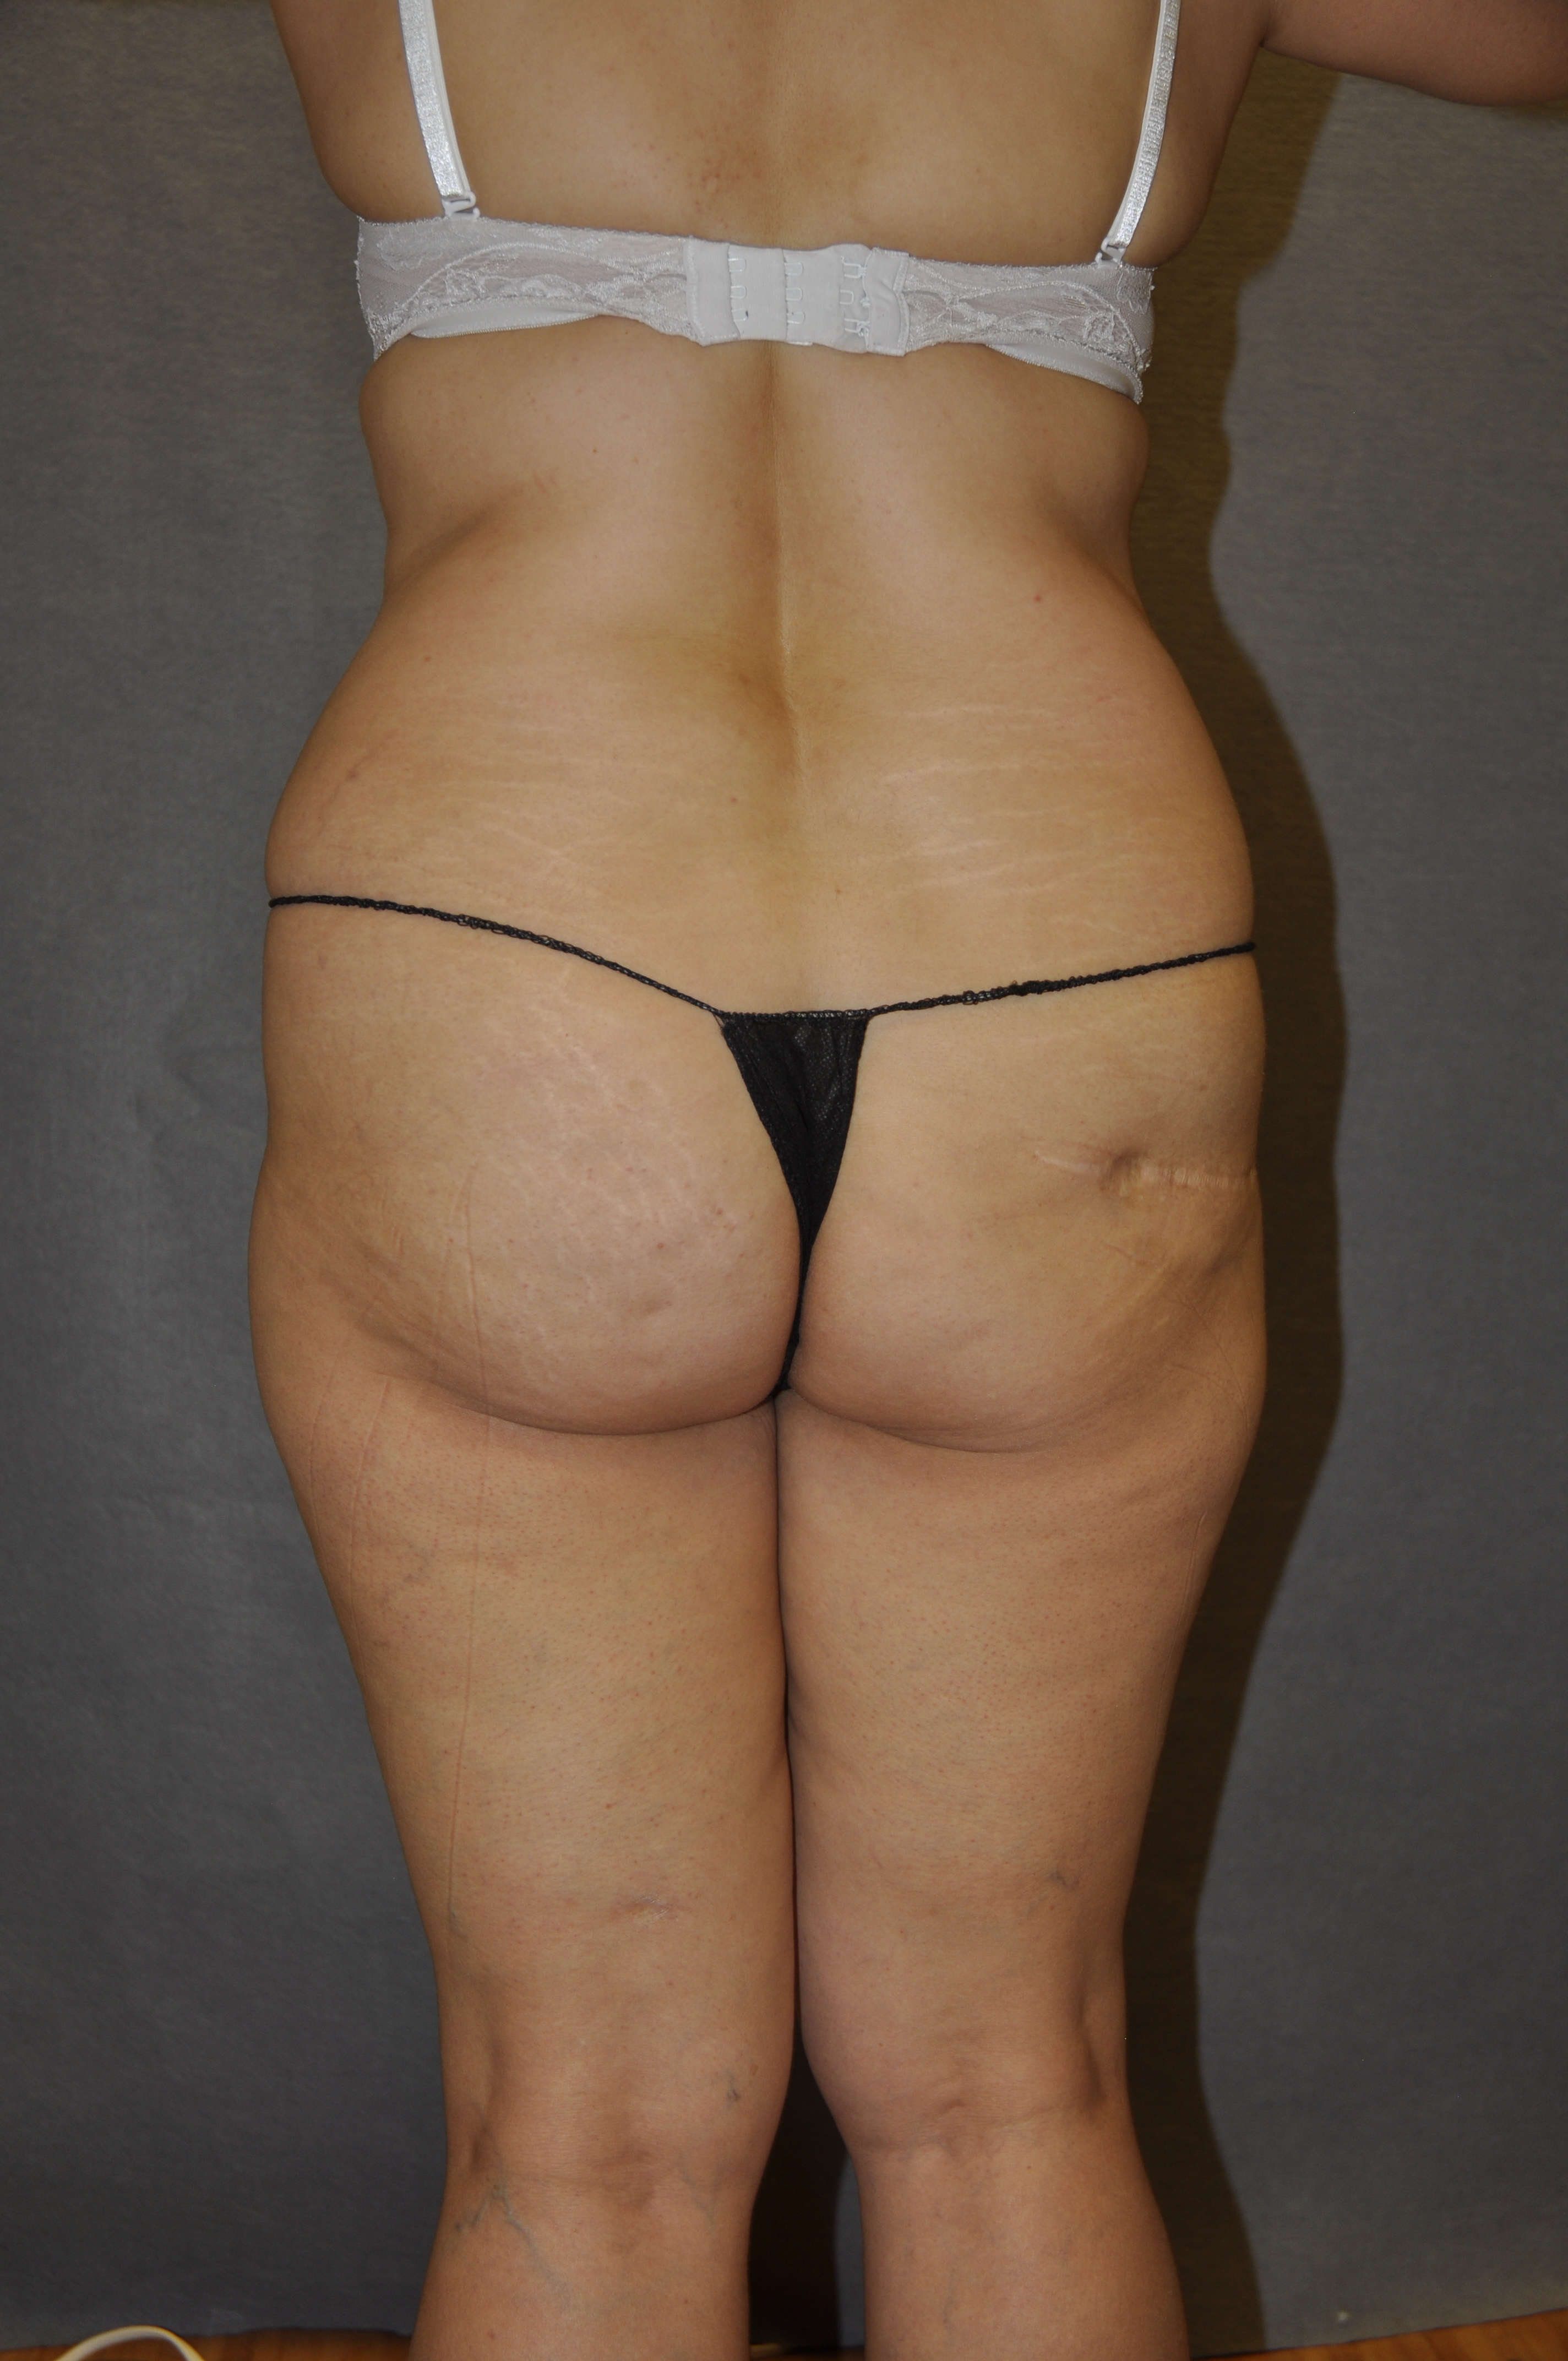 BRAZILIAN BUTT LIFT Before and After Results